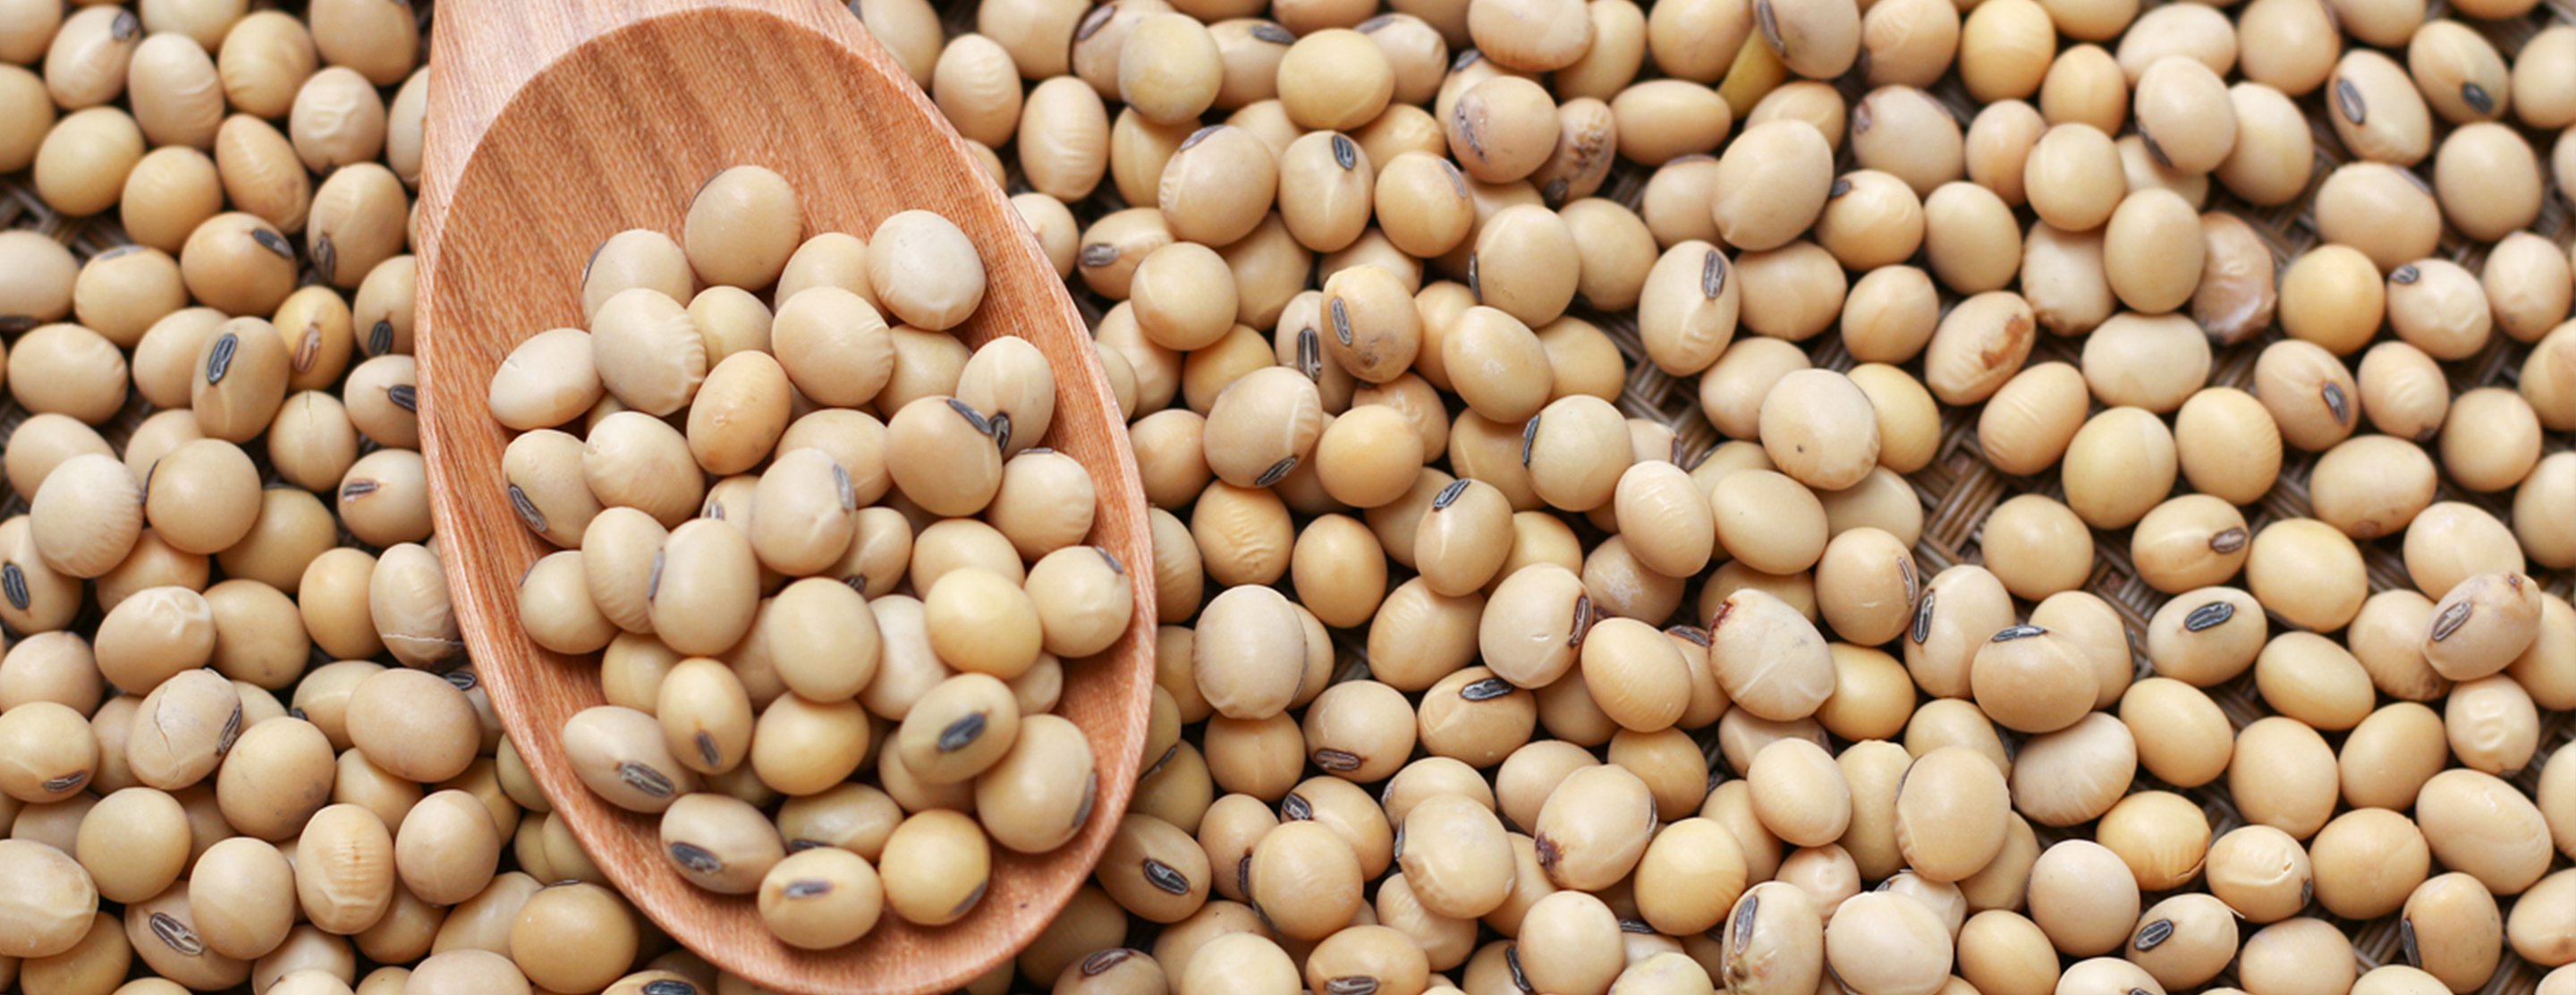 Top 20 Ways to Get More Soy in Your Diet